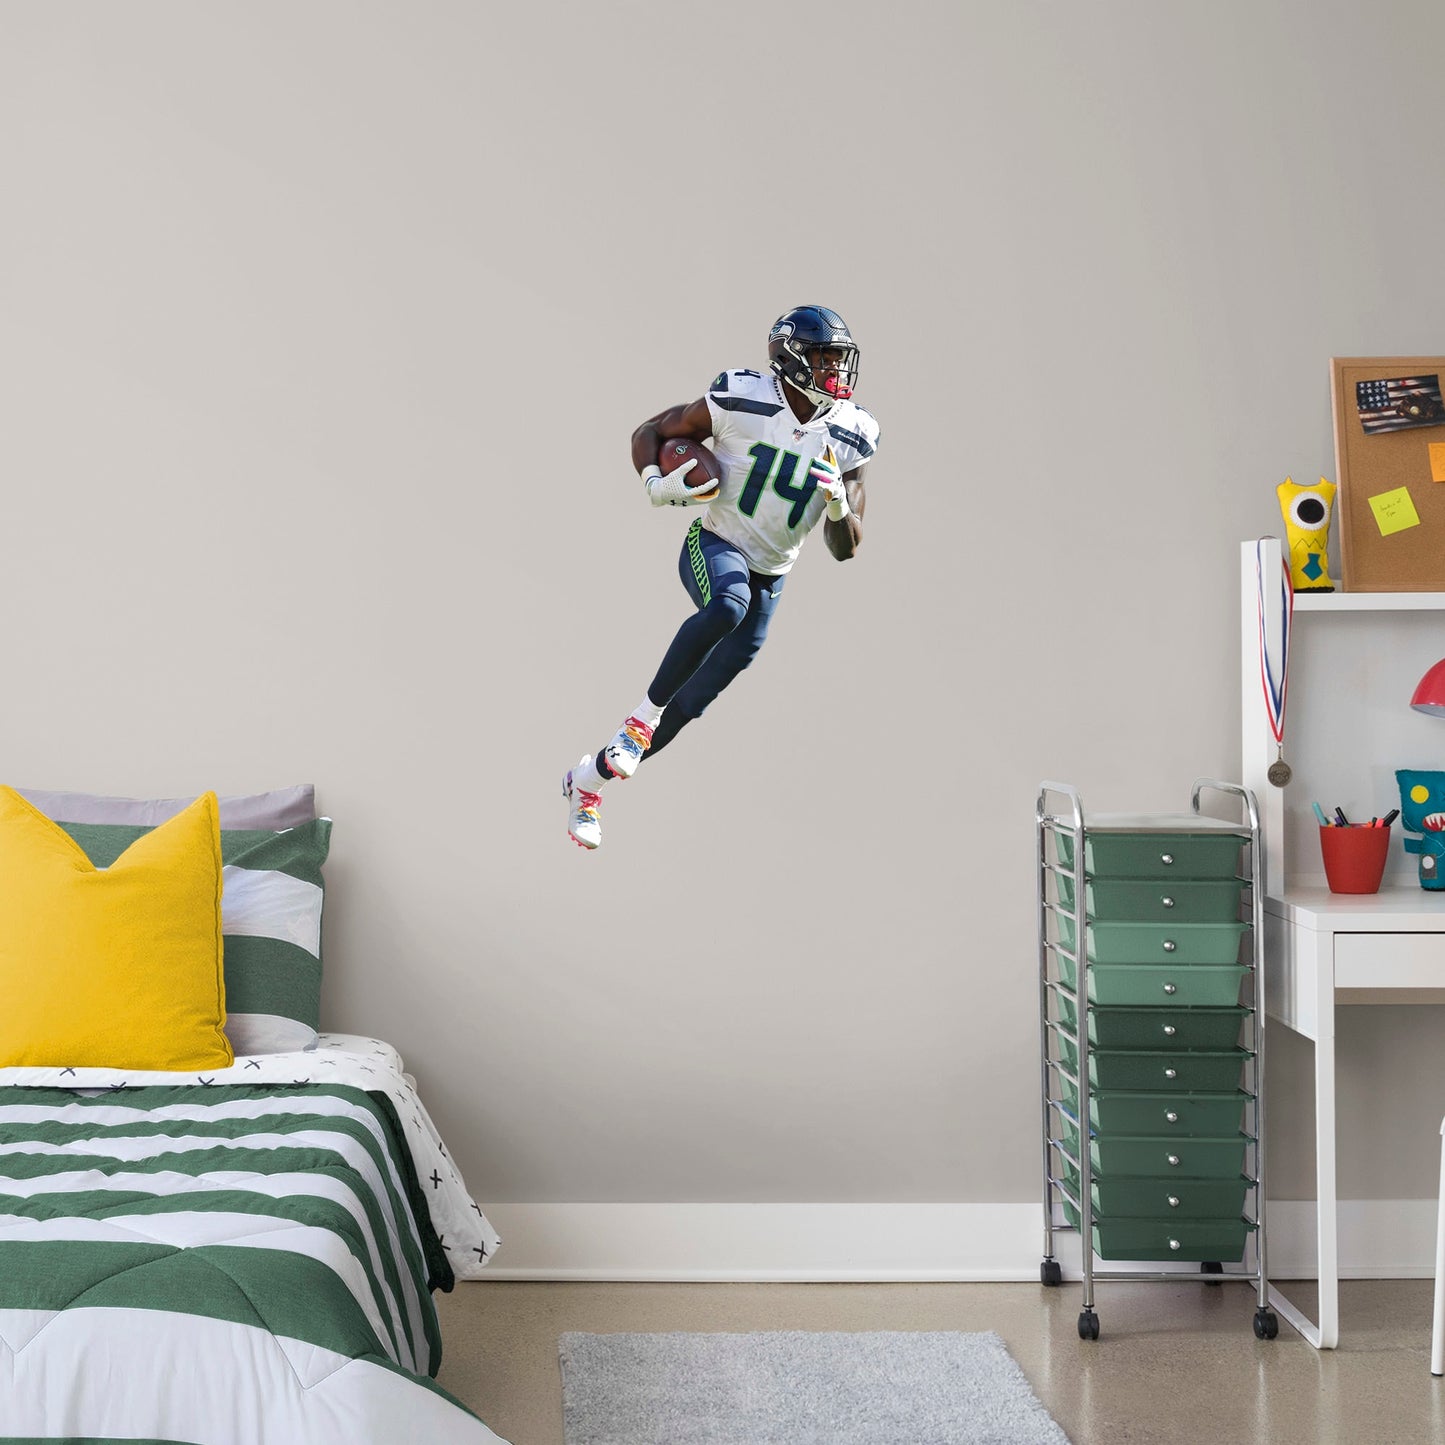 X-Large Athlete + 2 Decals (22"W x 38"H) Outmaneuver boring walls with this removable wall decal featuring D.K. Metcalf showing other players how to roll with it. This quality, giftable decal showcases Baby Bron in mid-sprint, clutching the football defensively while wearing the Seahawks’ signature College Navy, Action Green, and Wolf Gray colors. This durable decal will help you demonstrate a strong offense in your bedroom, office, or entertainment room.